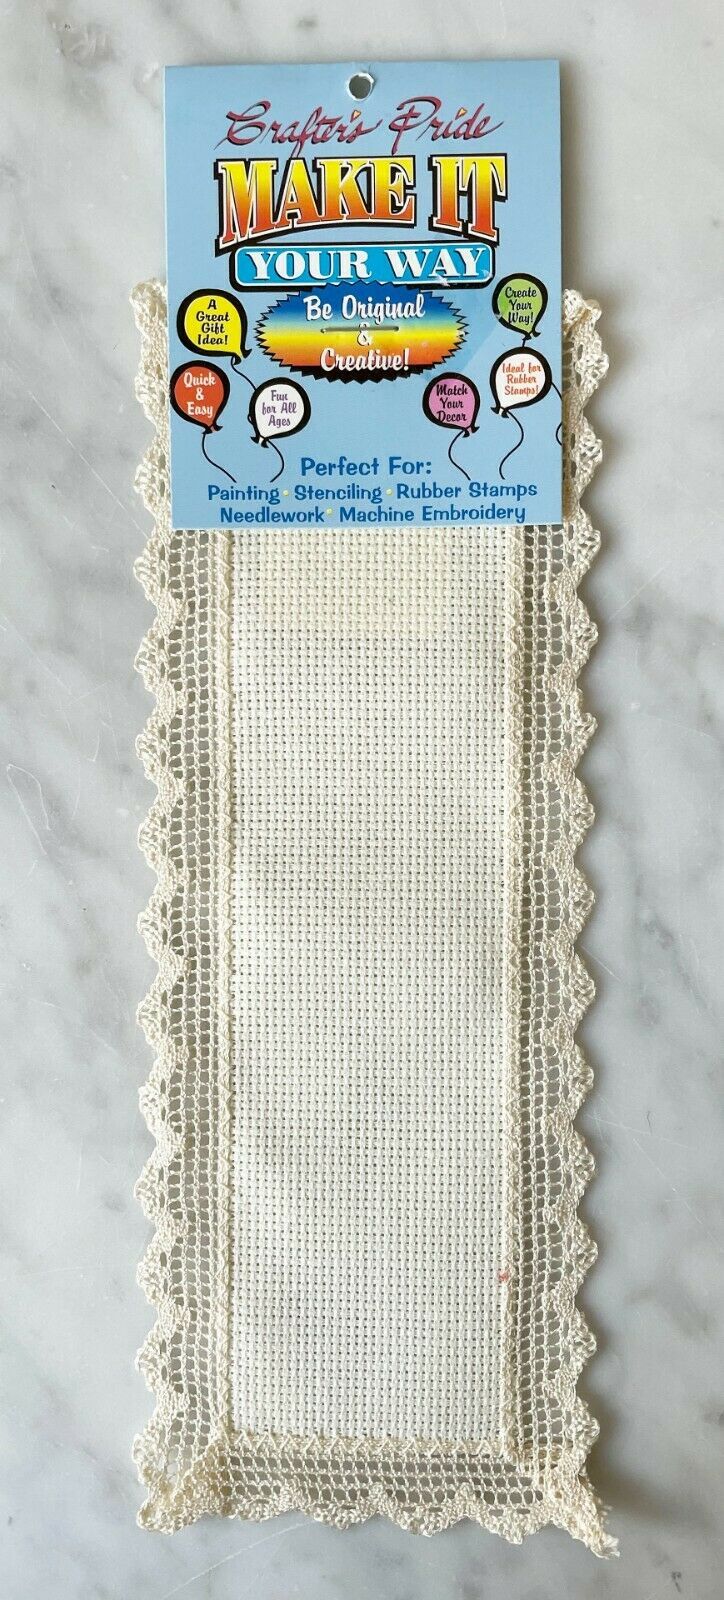 Make It Your Way Crafters Pride Cross Stitch Bookmark 18 Ct Aida Ivory Lace Trim - $6.60